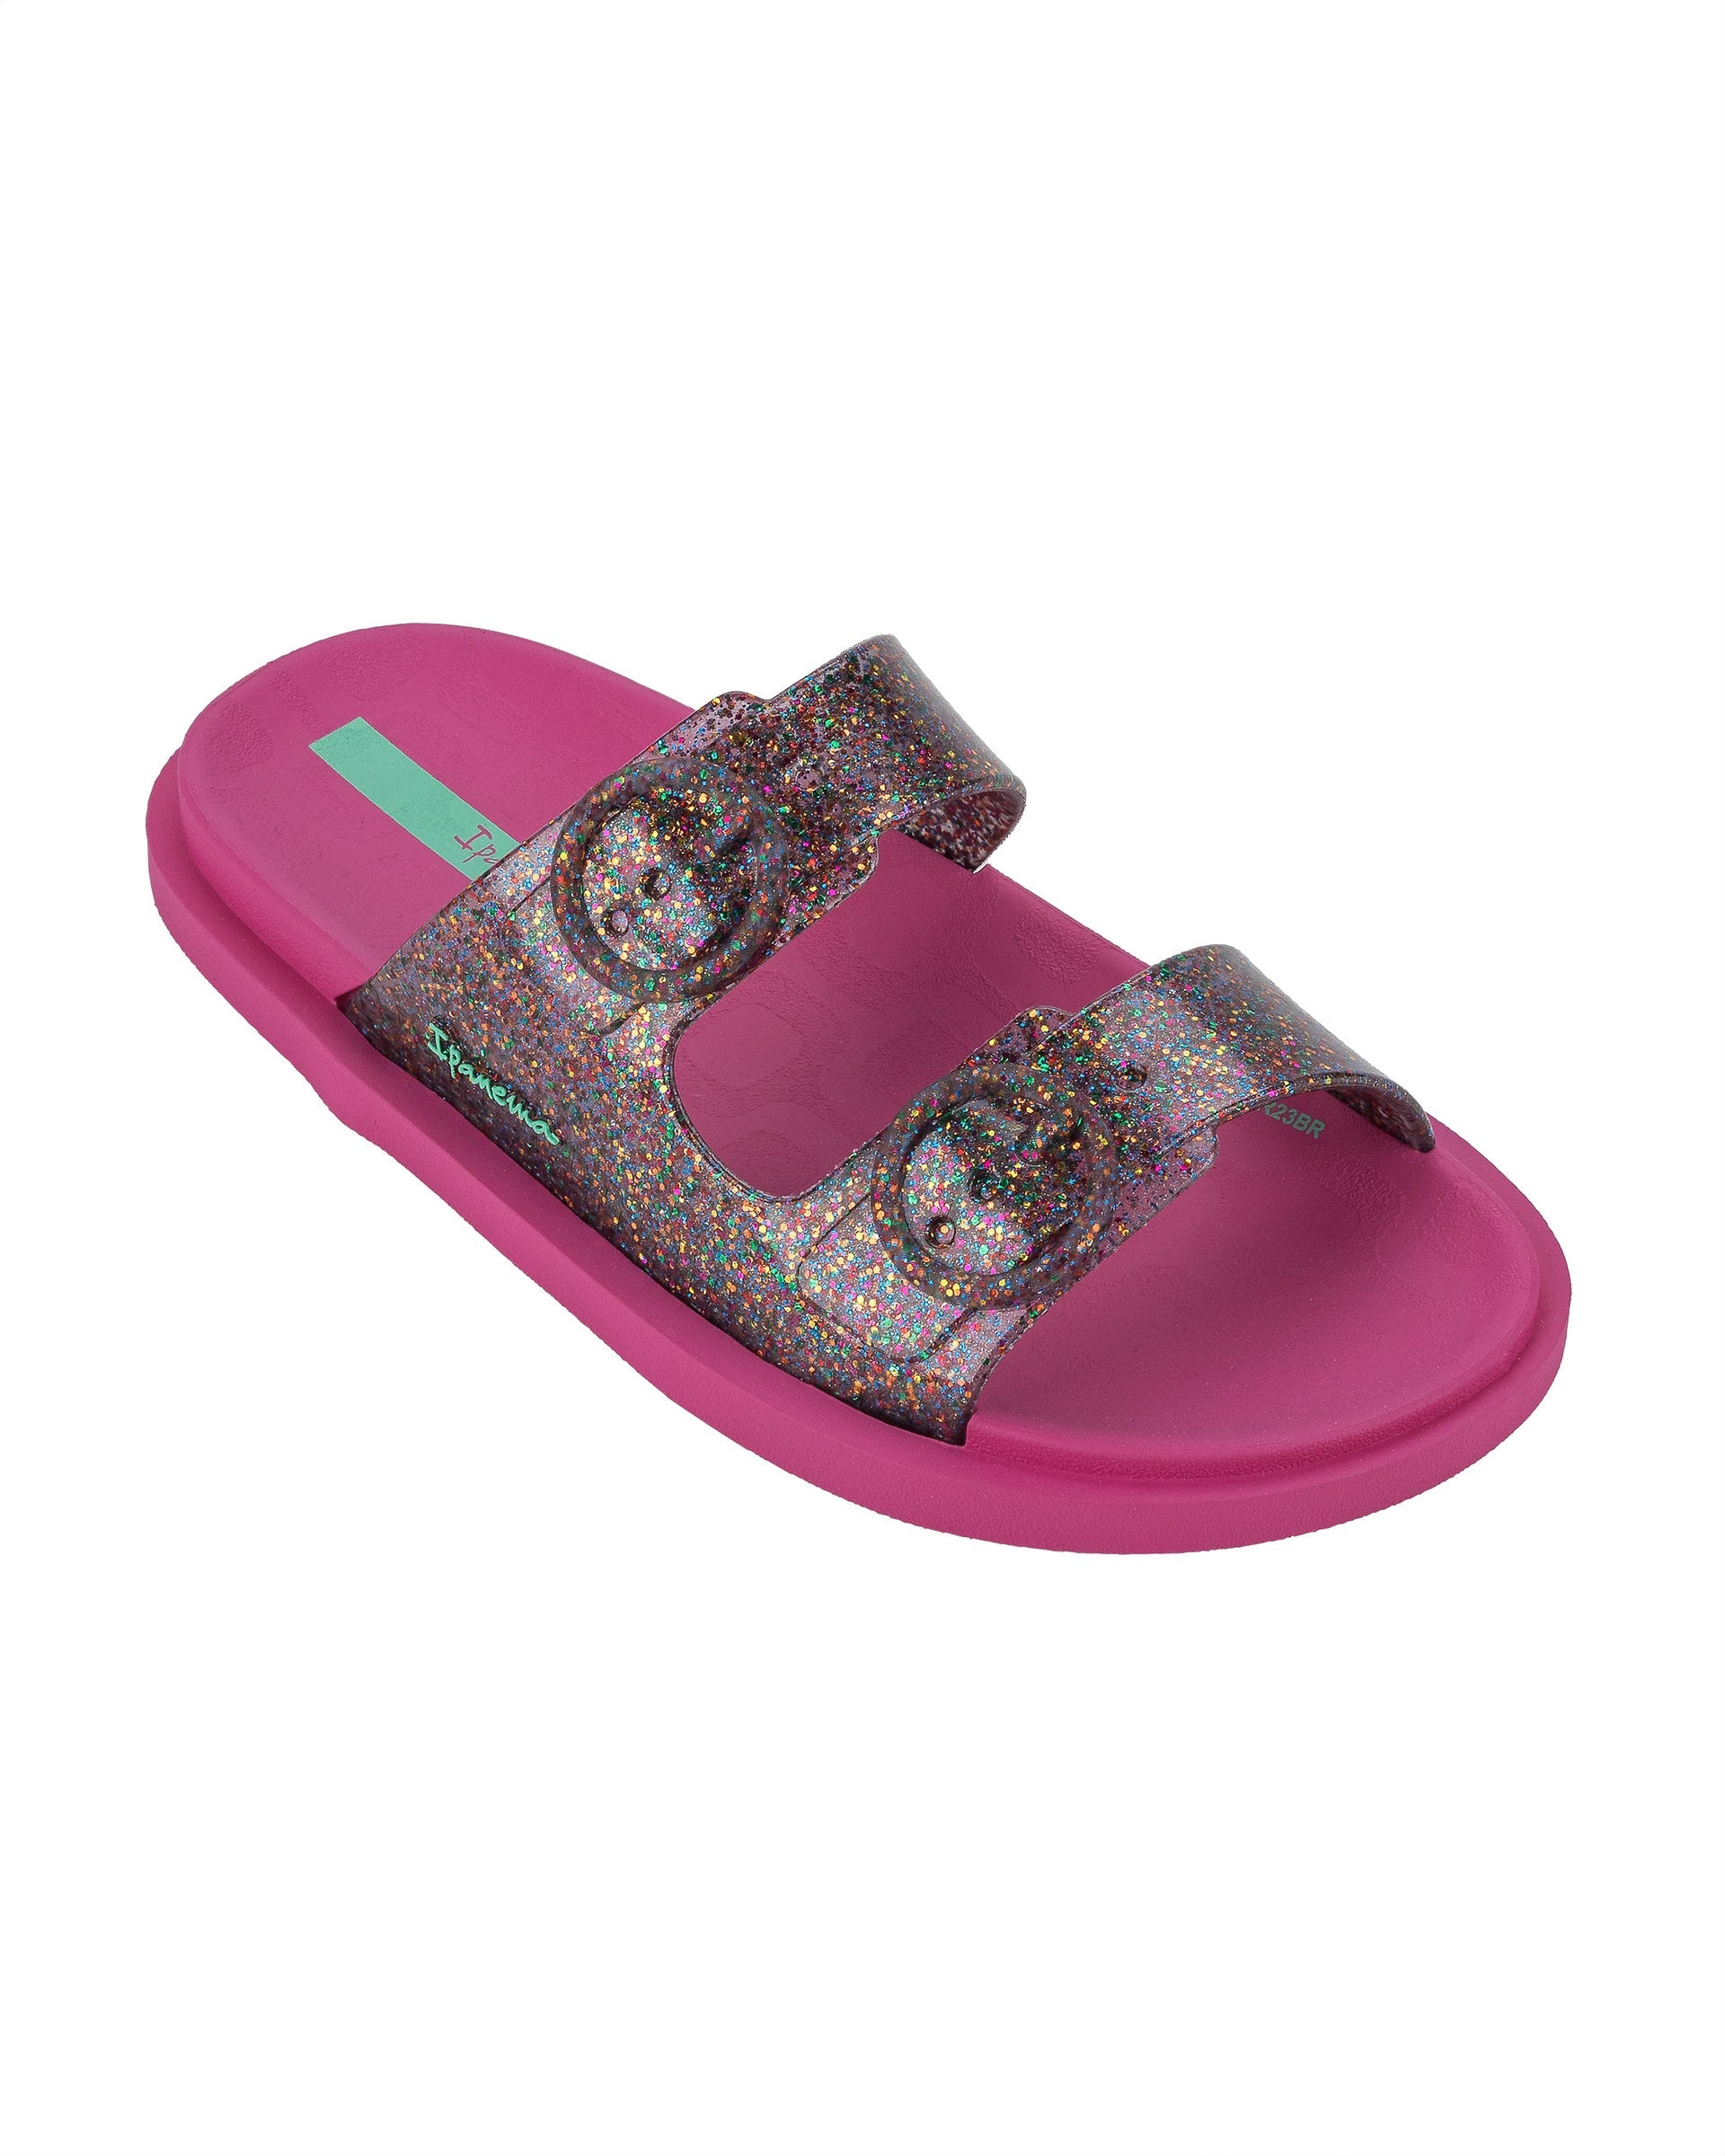 Angled view of a pink Ipanema Follow kids slide with a multicolor glitter upper.